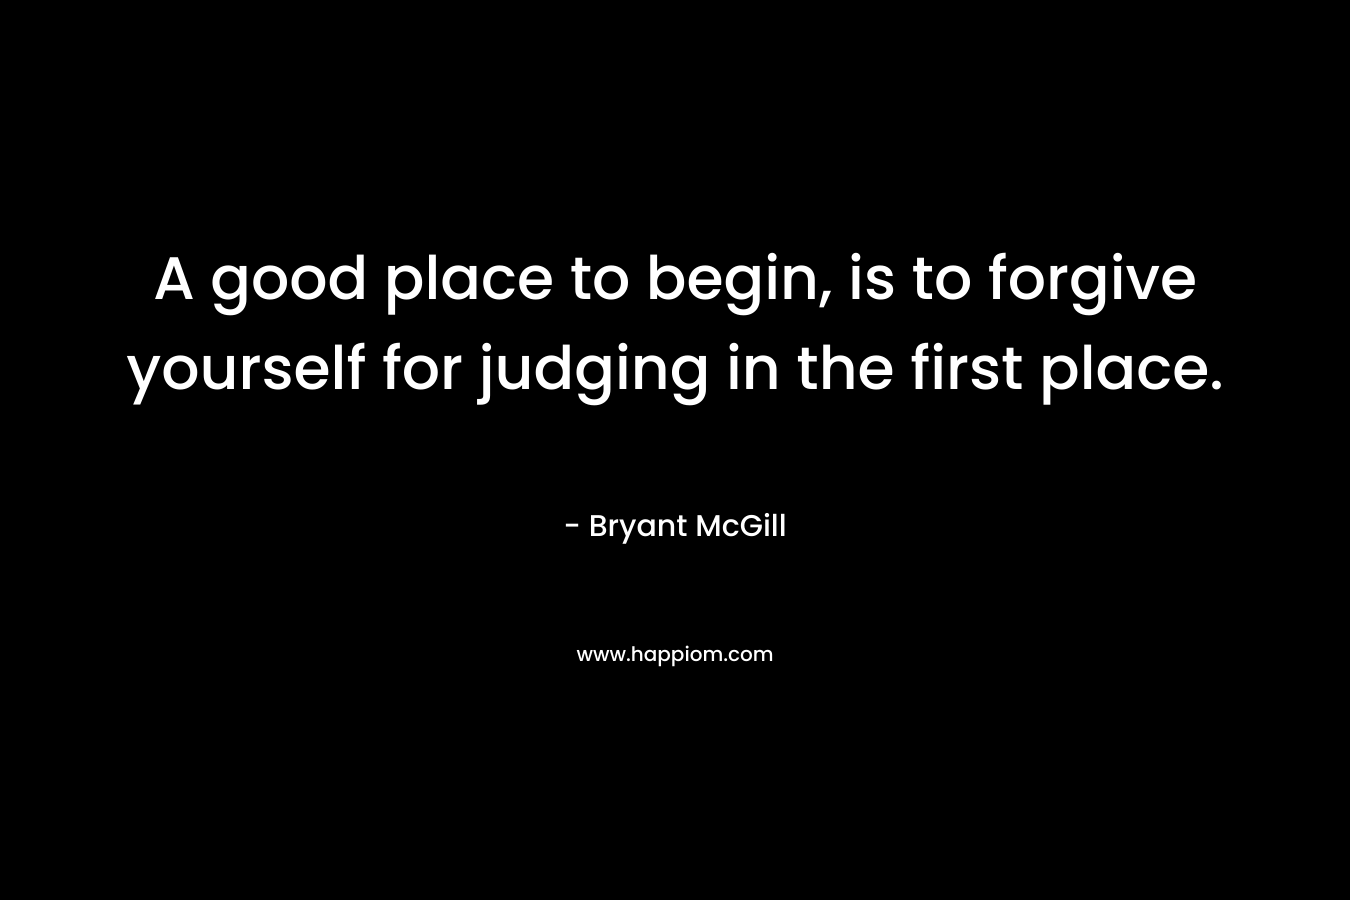 A good place to begin, is to forgive yourself for judging in the first place.